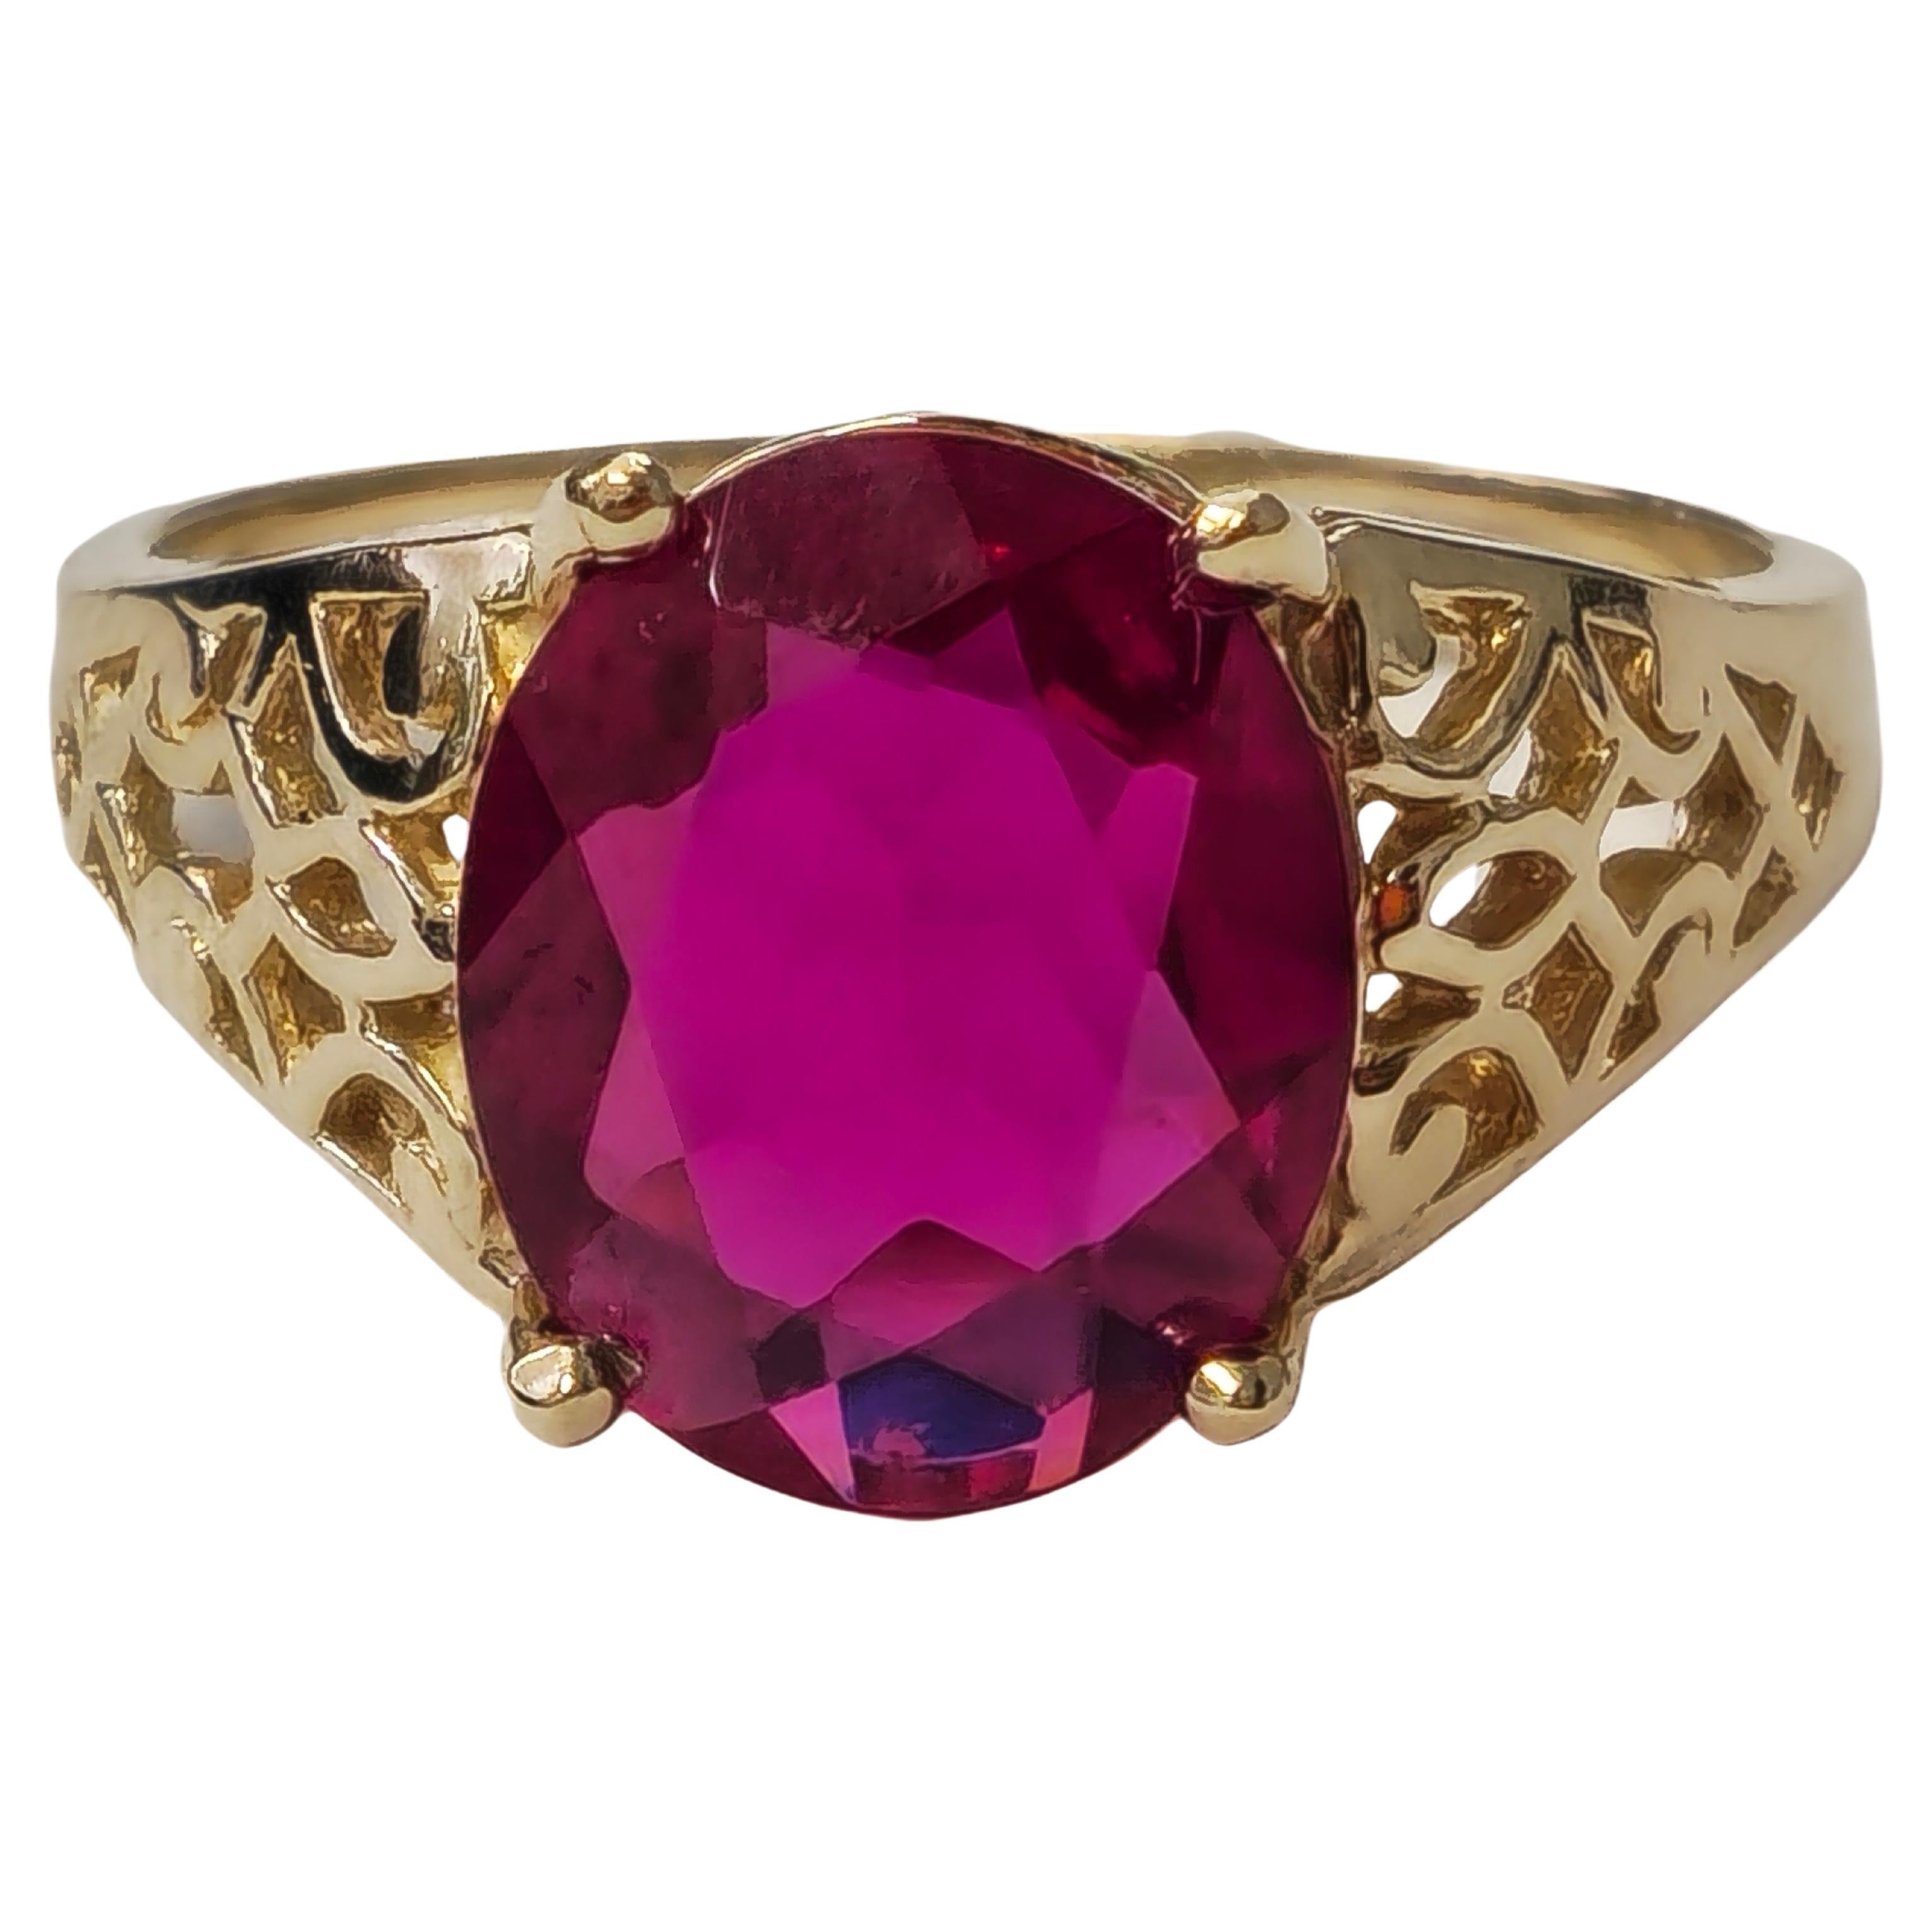 The Collective Vintage AAA Ruby Ring in Yellow Gold (Bague de collection en or jaune avec rubis AAA)  en vente